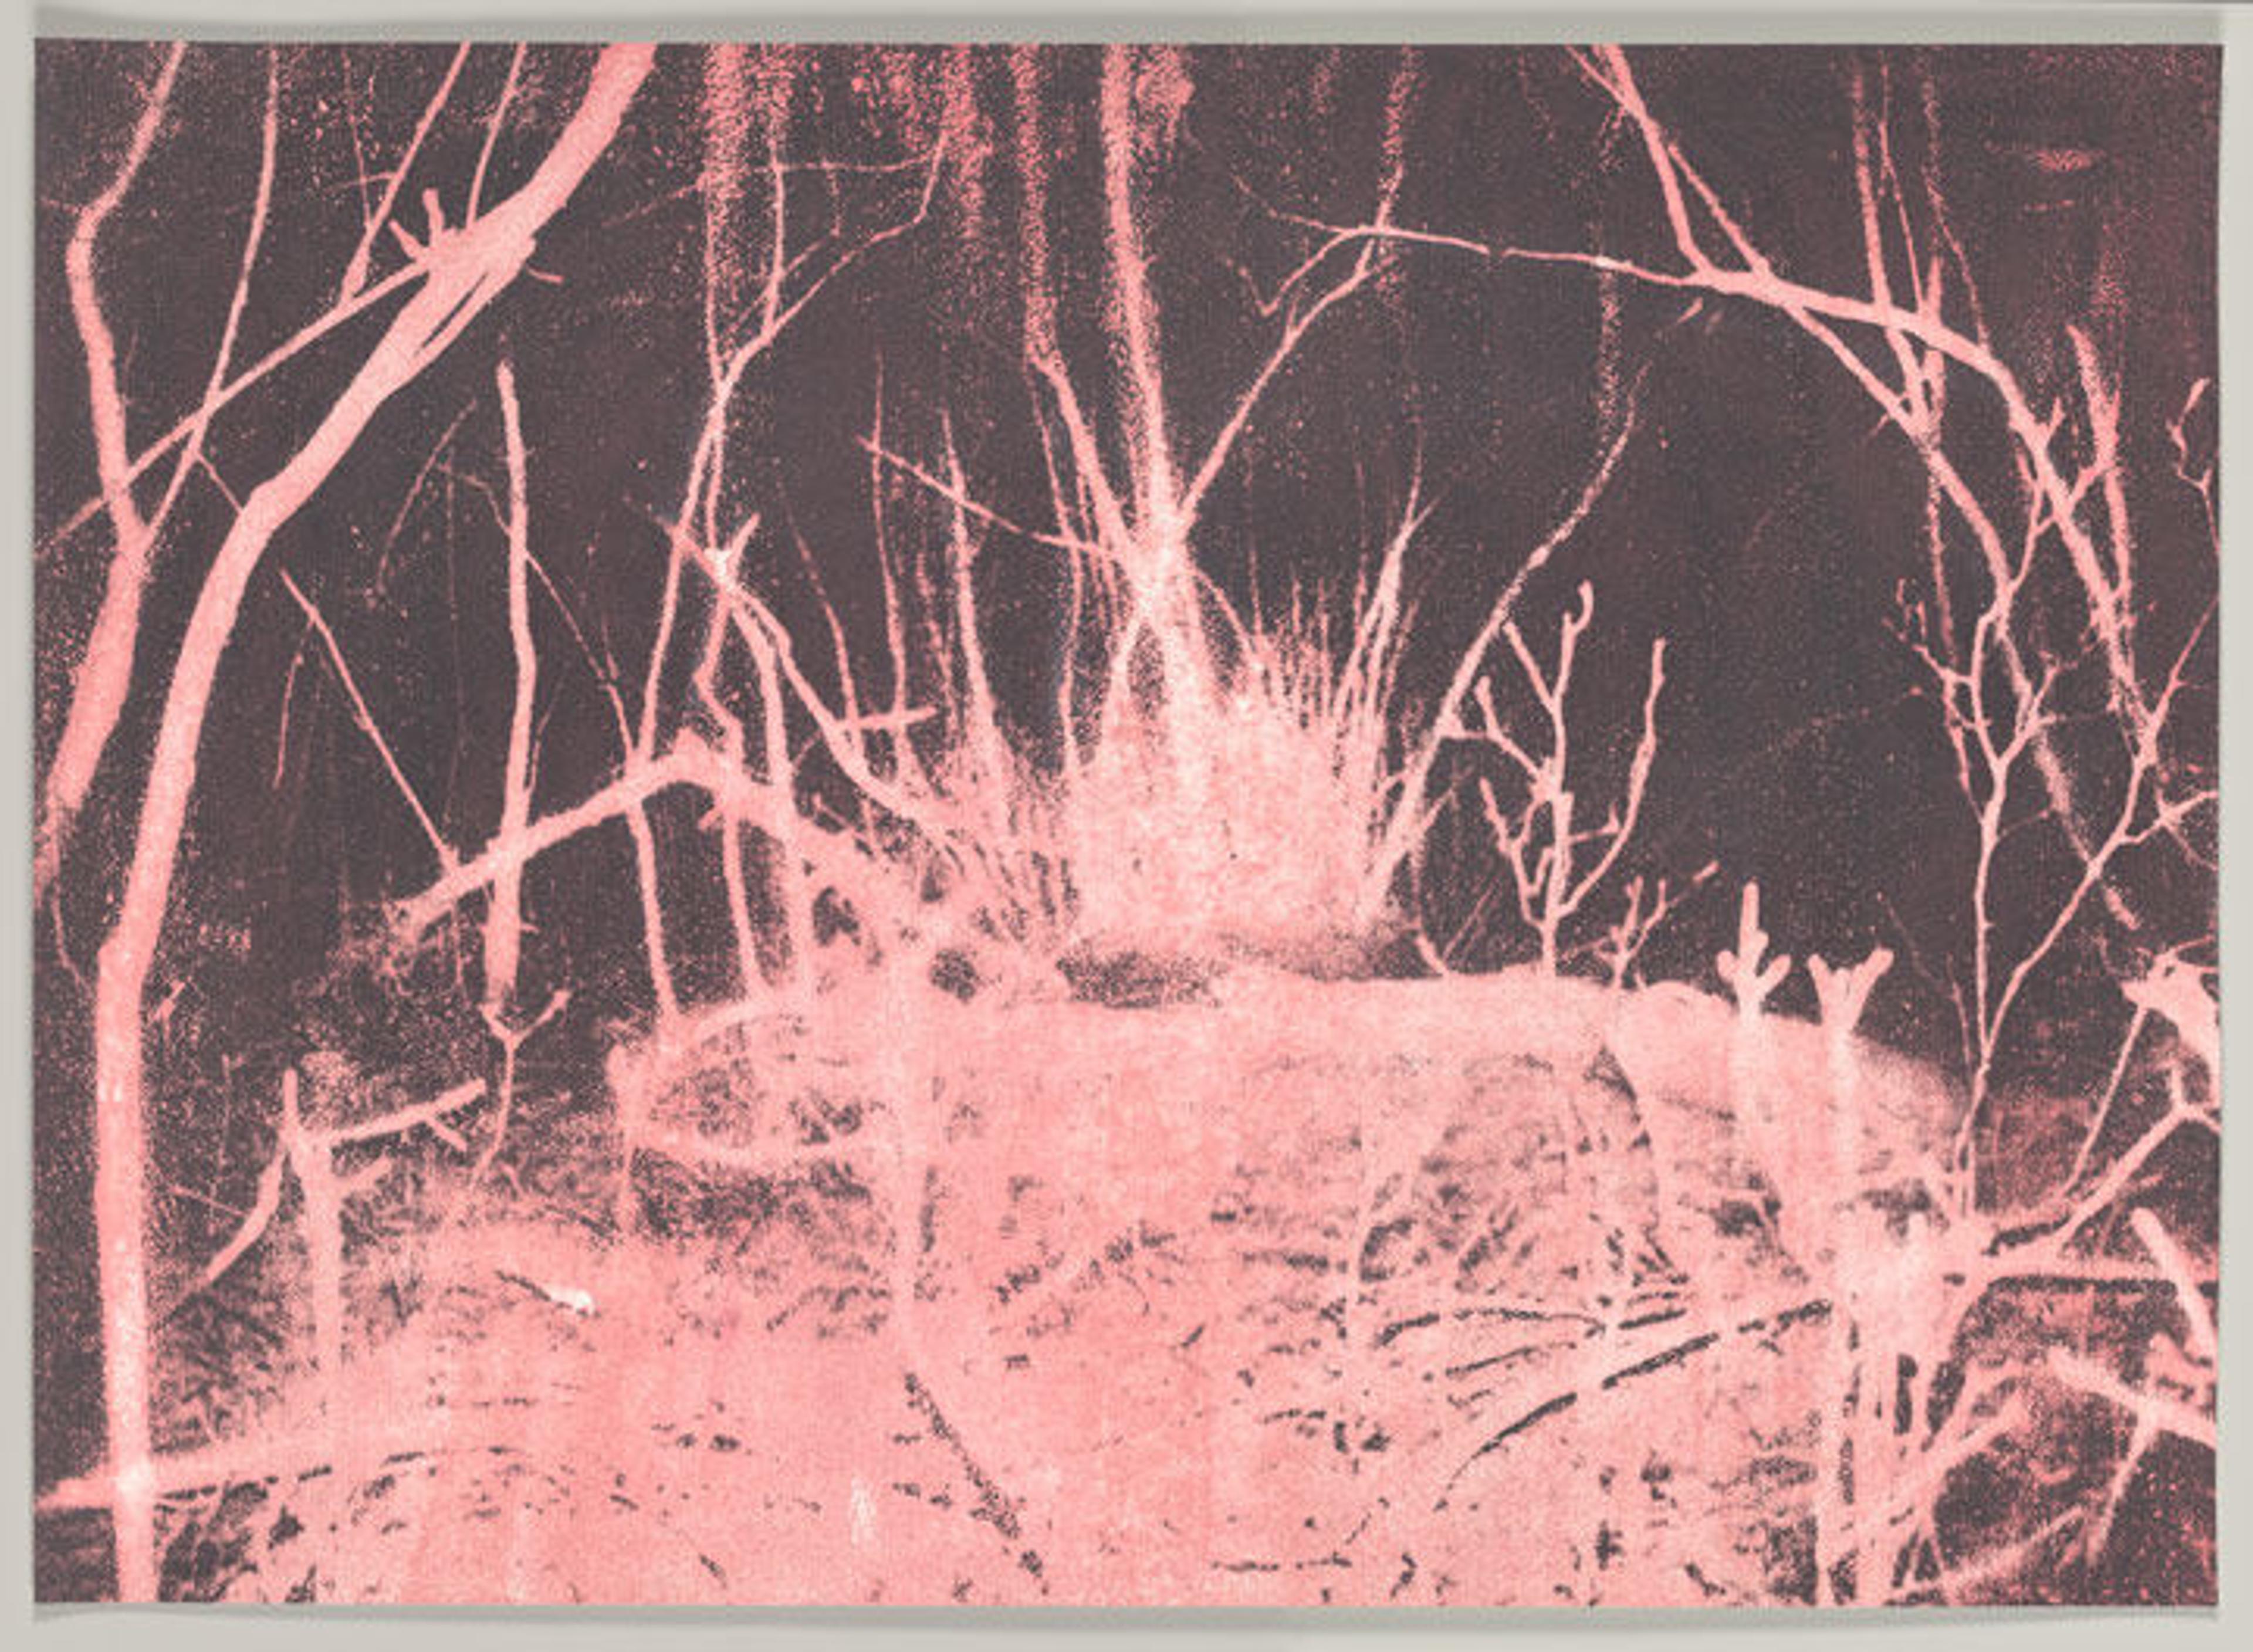 'Hideaway' by Glen Baldridge, a screenprint of bright pink and deep greys depicting a wooded landscape at night